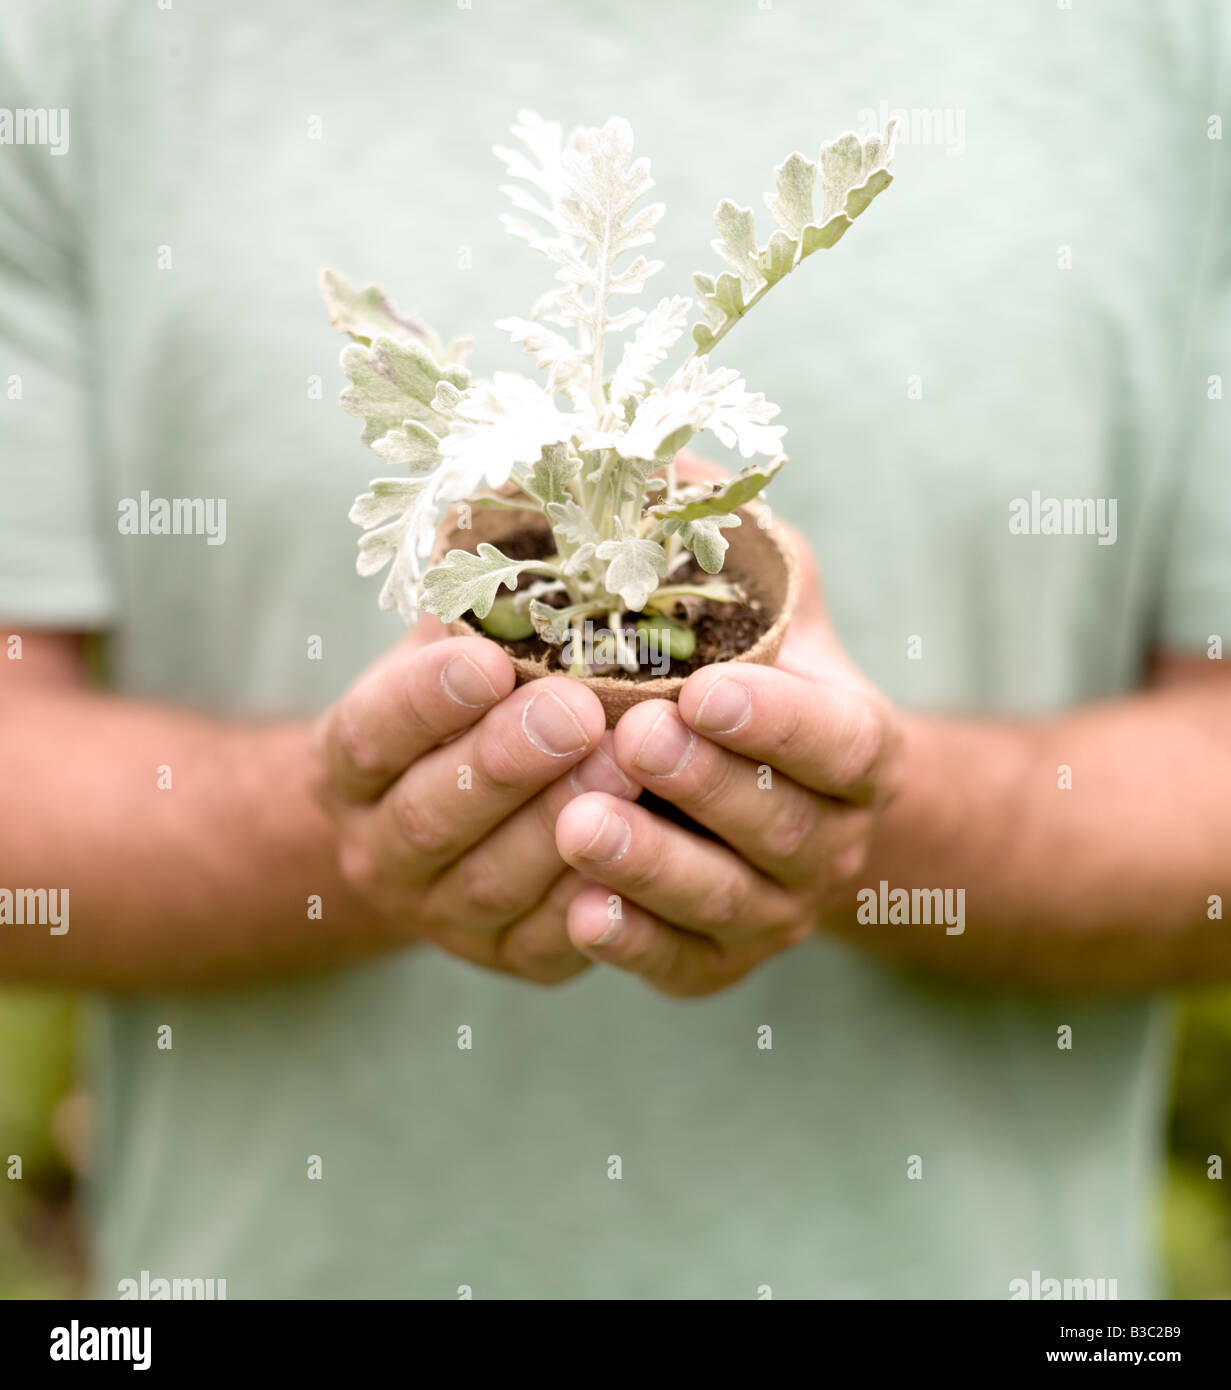 A man holding a plant in a plant pot, close up Stock Photo